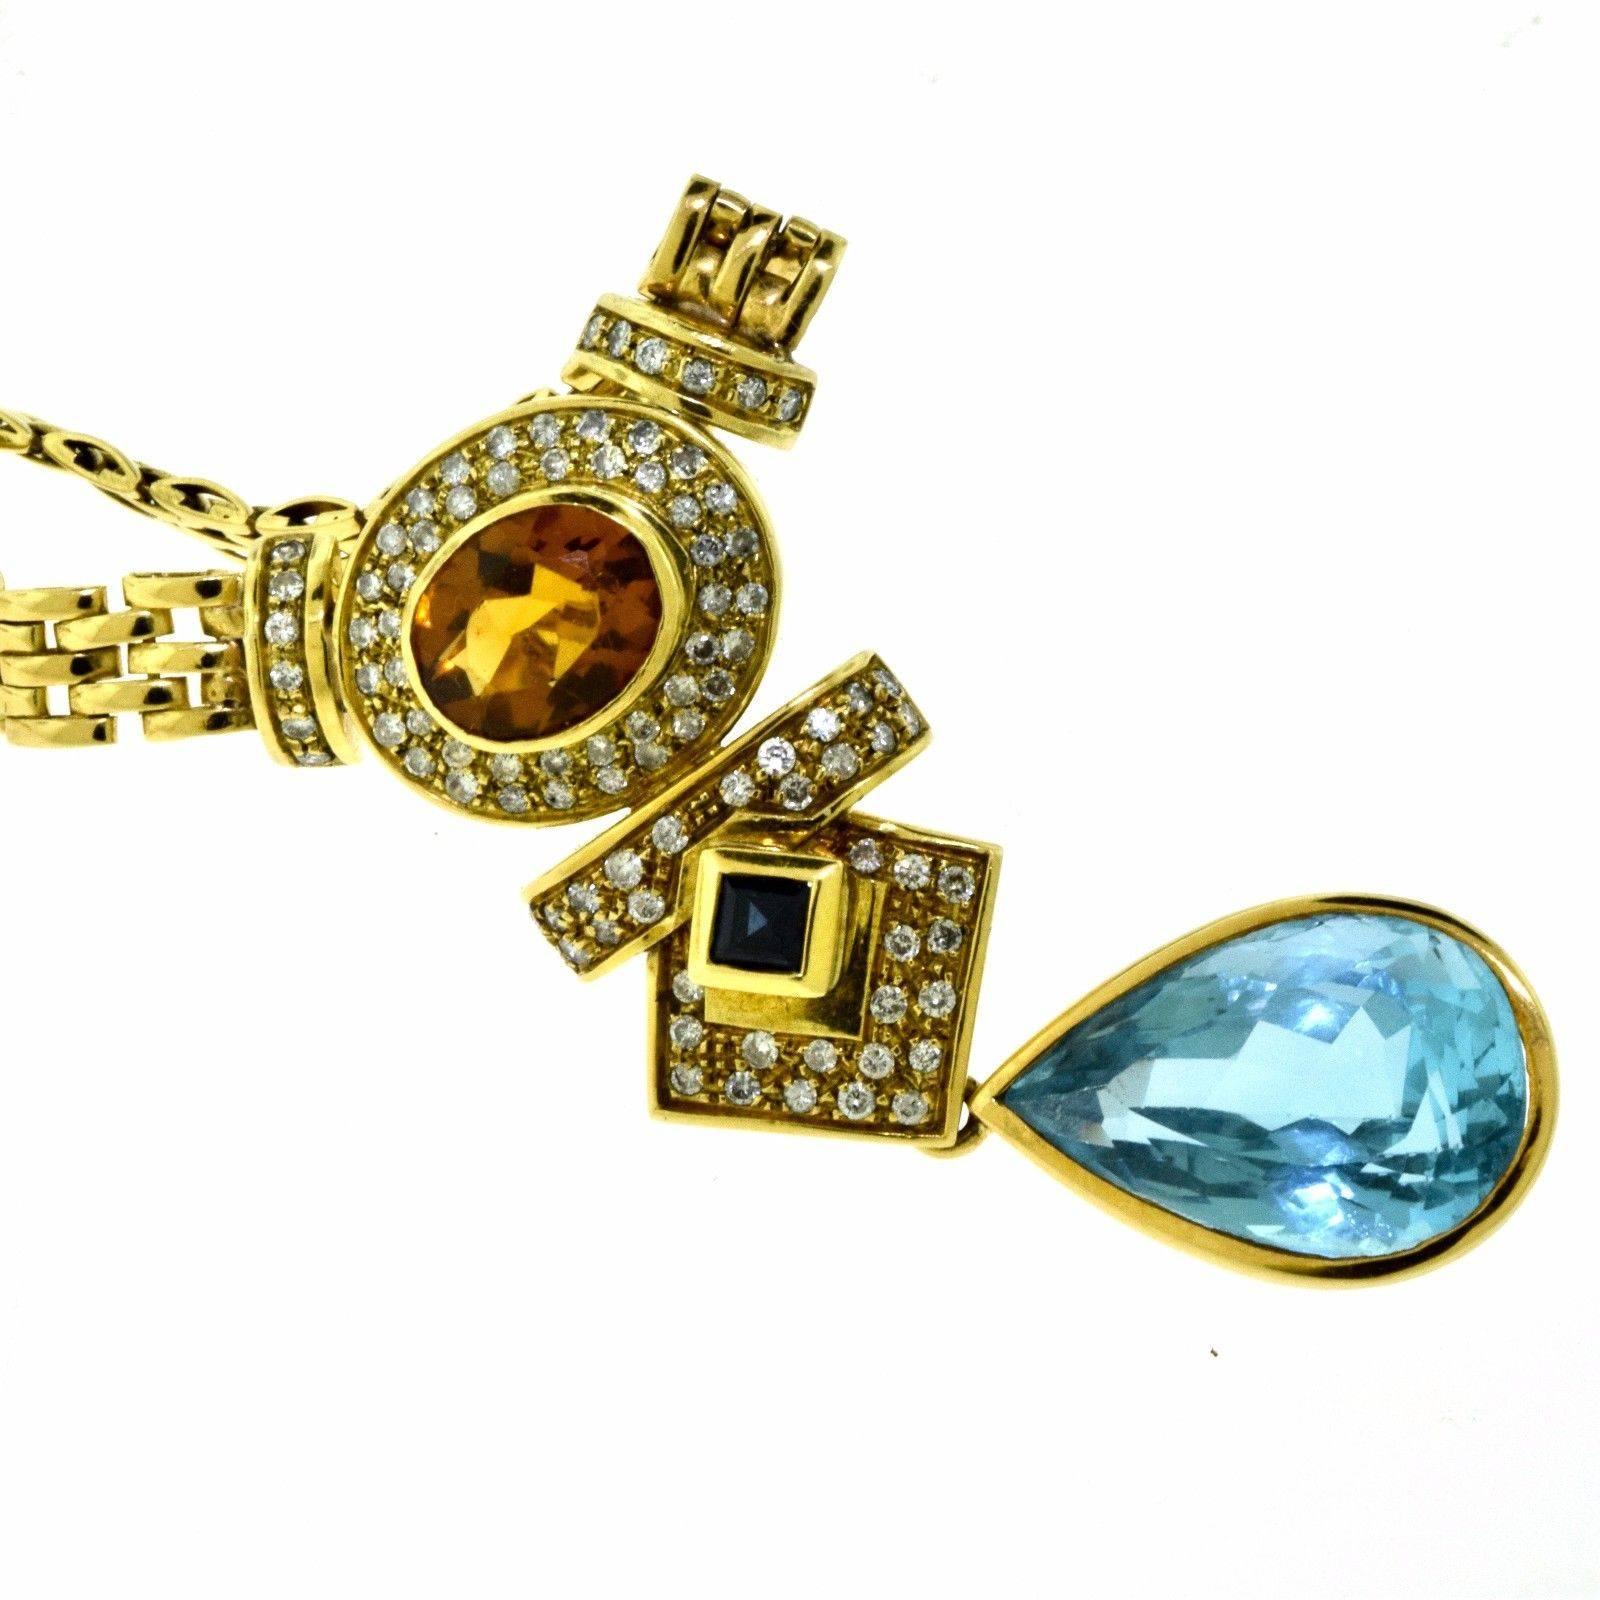 Earrings:
Metal: 18k Yellow Gold
Stones: 1 Pear Shaped Blue Topaz
              1 Square Sapphire
              1 Oval Citrine
              35 Round Brilliant Diamonds
Blue Topaz Weight: 10 ct
Blue Topaz Dimensions: 19.69 x 13.06 x 13.65 mm
Citrine